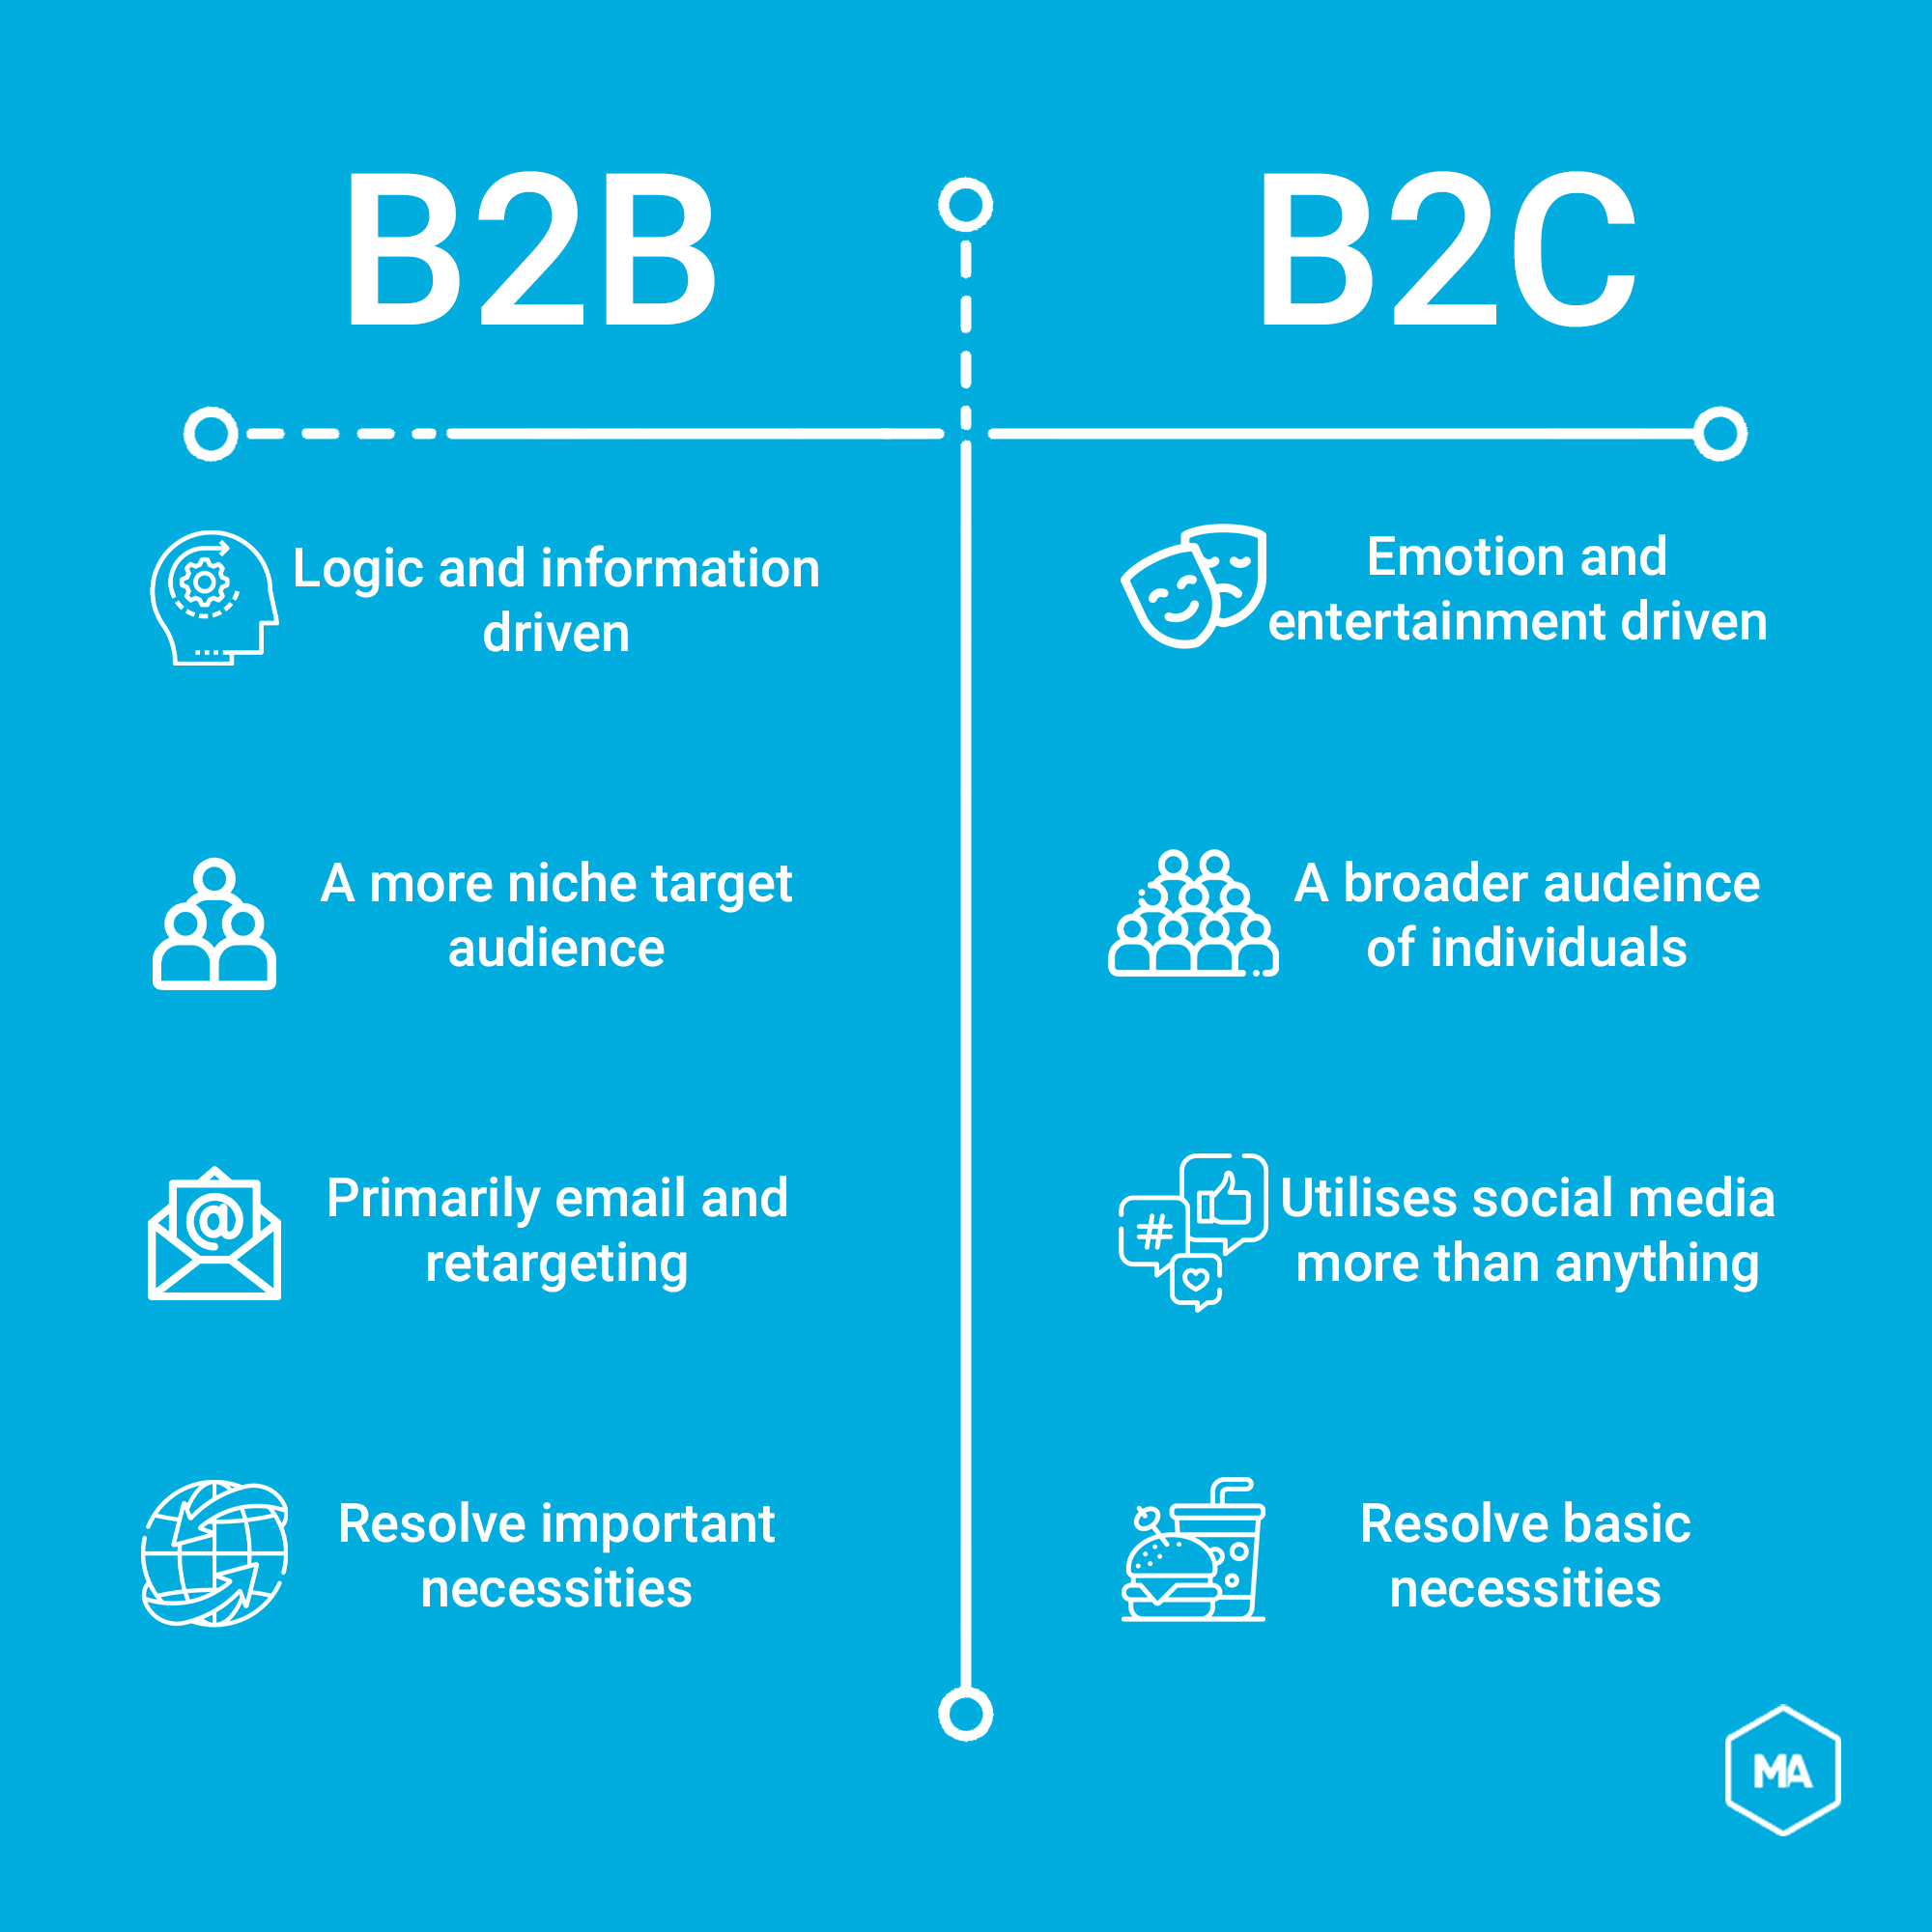 How Are B2B and B2C Content Marketing Different?